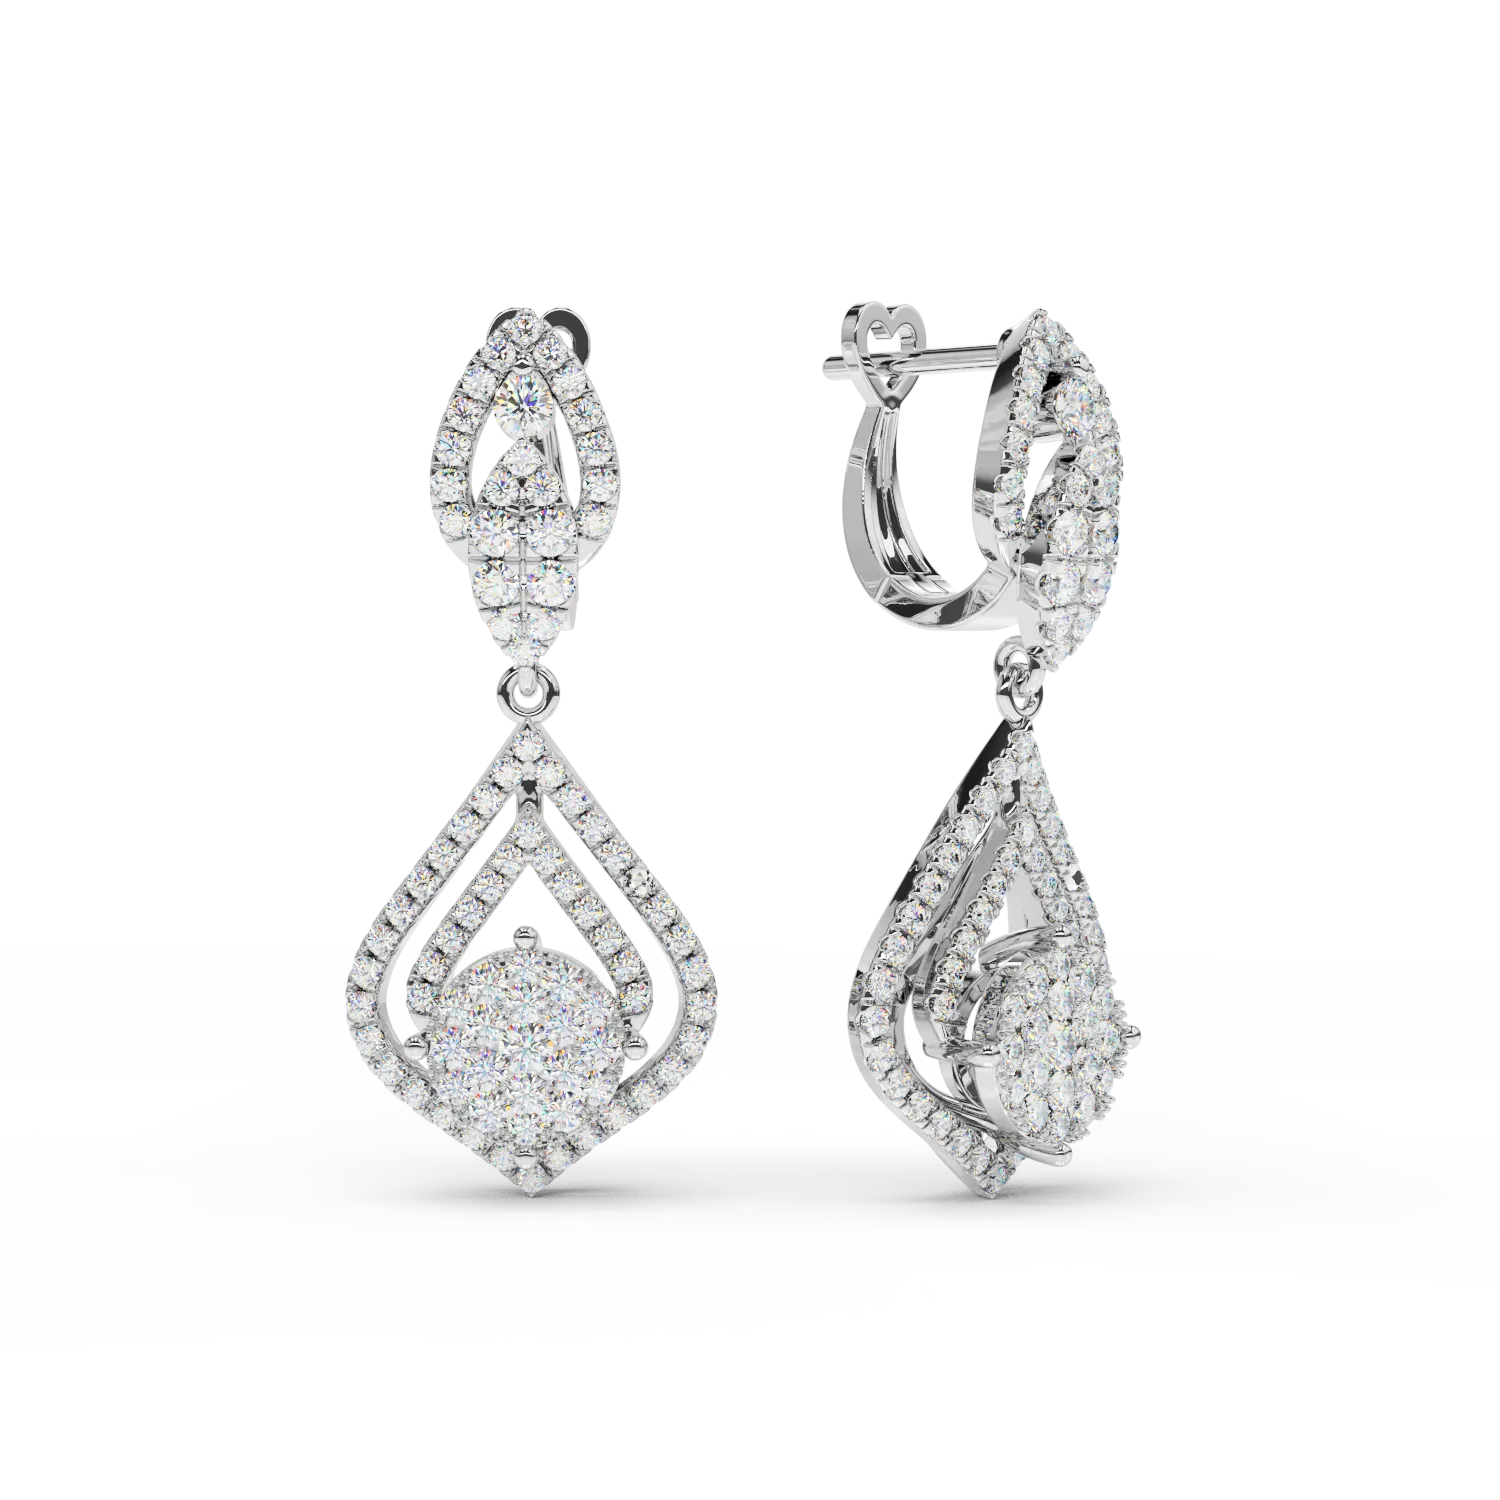 18K white gold earrings with 1.6ct diamonds